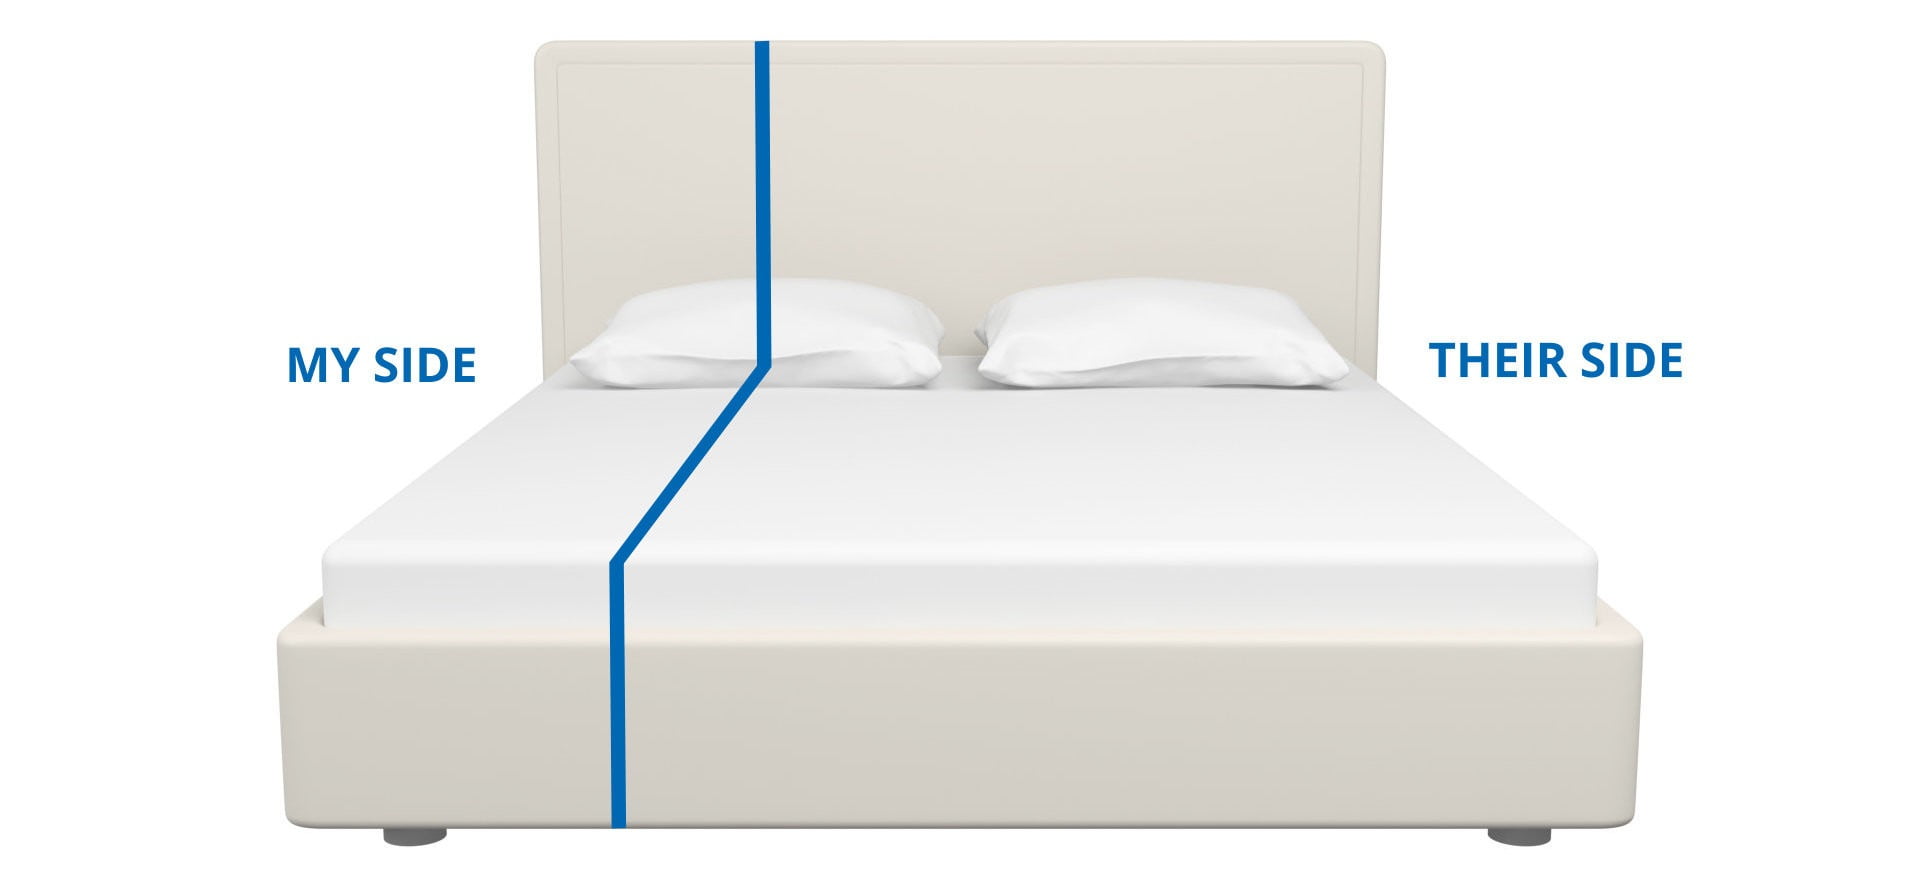 Bed Sizes Uk And Mattress Size, King Size Bed Uk